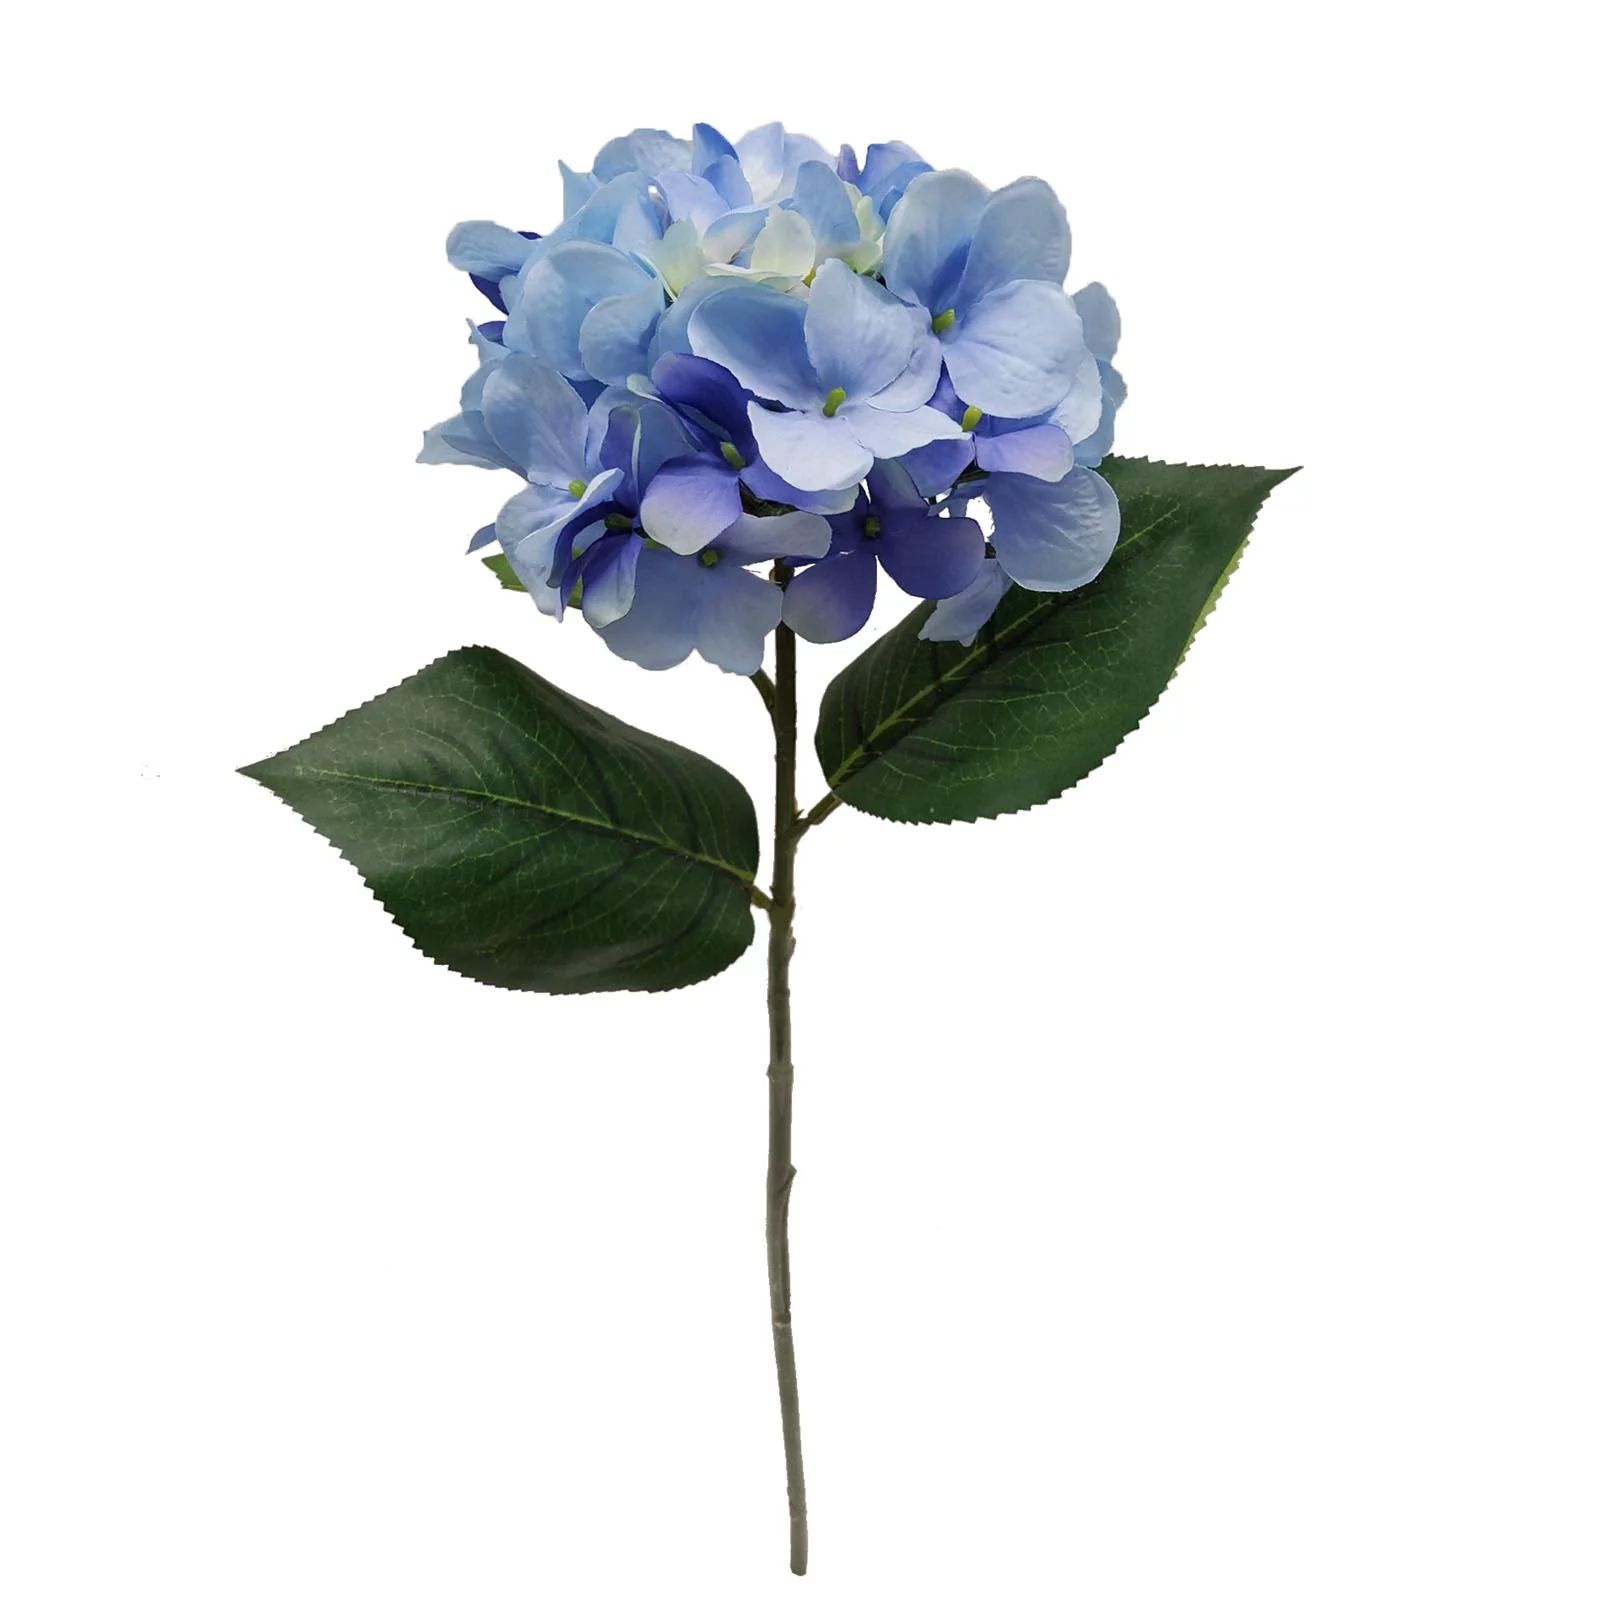 MainstaysMainstays 24" Artificial Flower Hydrangea Stem, Blue Color.USD$3.47(5.0)5 stars out of 3... | Walmart (US)